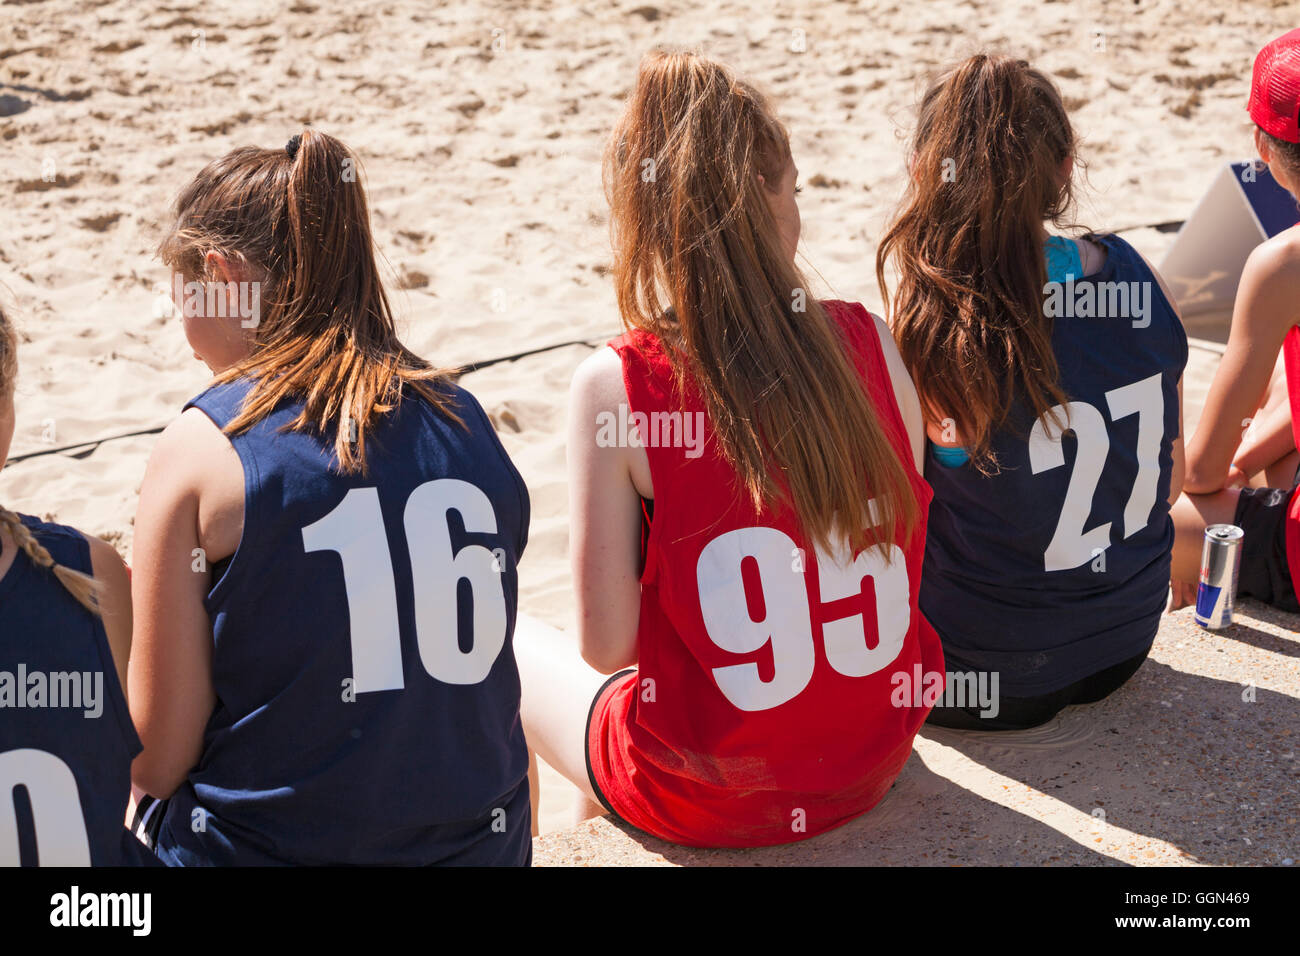 Branksome Chine Beach, Poole, Dorset, UK.  6 August 2016. Teams from across the UK compete in the British Beach Handball Championships at Branksome Chine Beach with the weather warm and sunny Credit:  Carolyn Jenkins/Alamy Live News Stock Photo